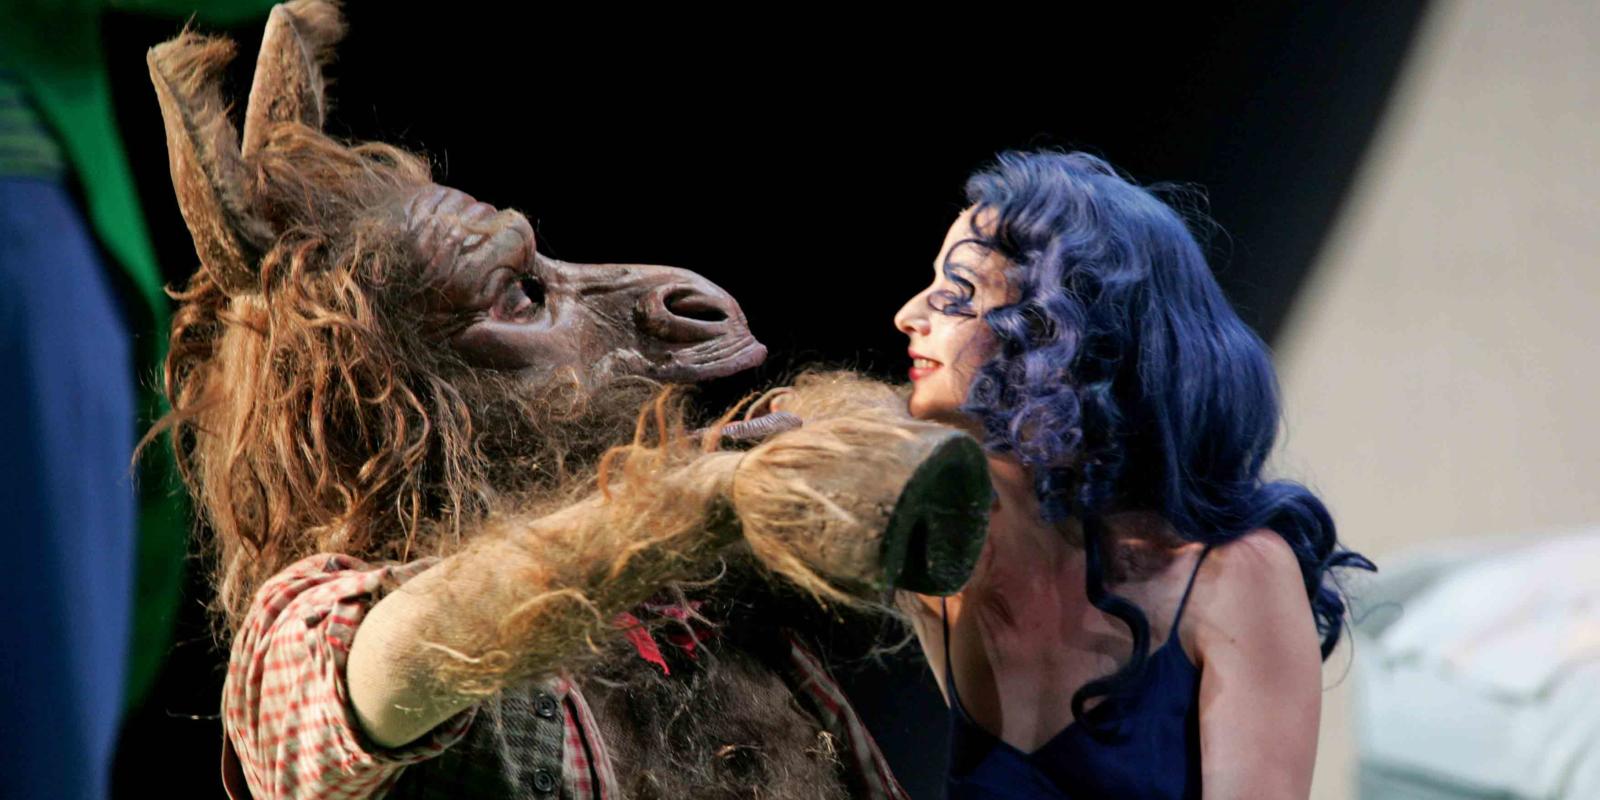 An image of Peter Rose and Sarah Tynan in ENO's 2004 production of A Midsummer Night's Dream